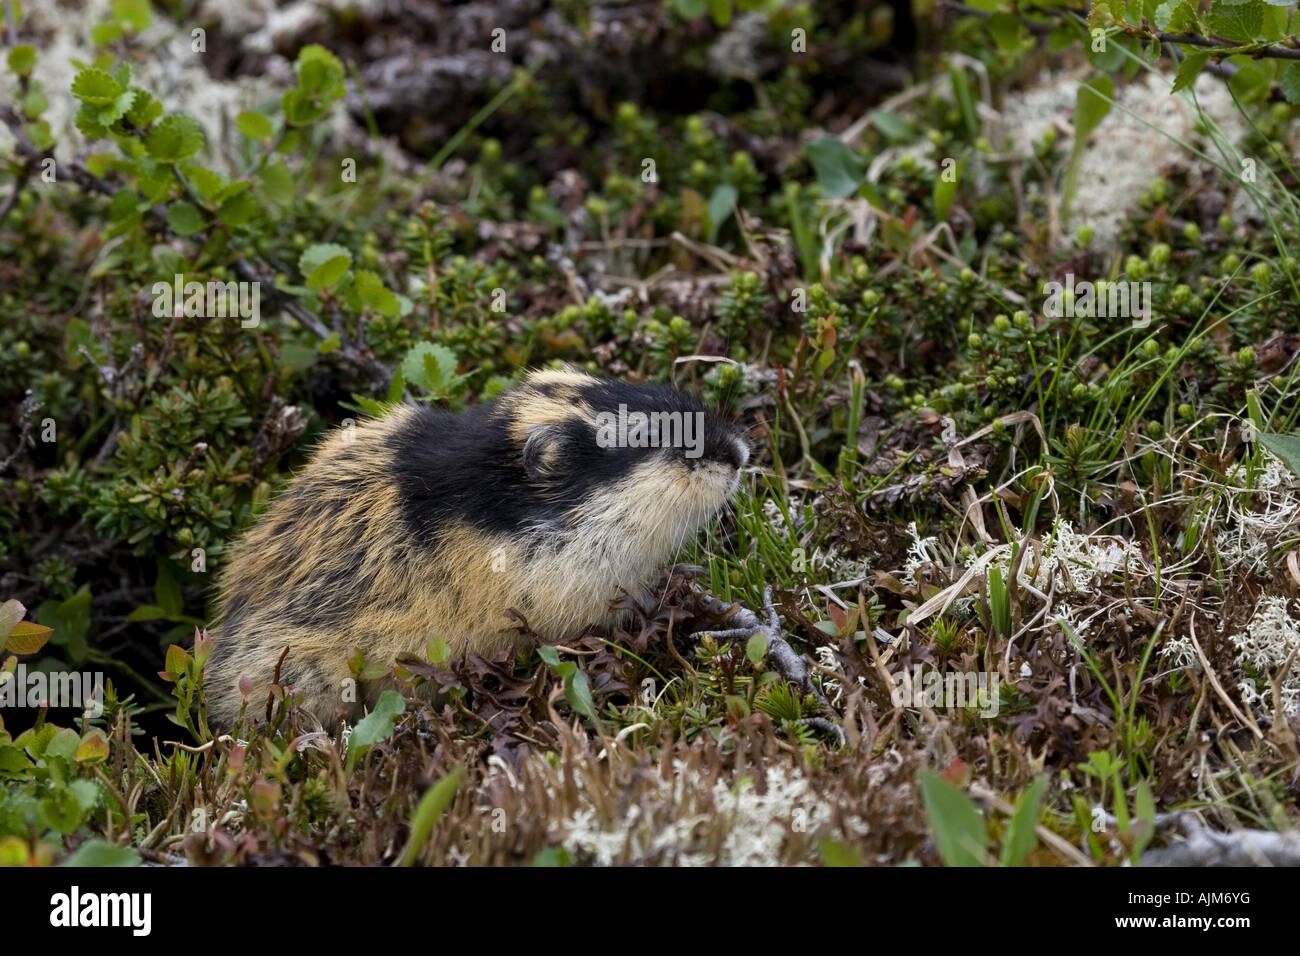 Siberian brown lemming - Facts, Diet, Habitat & Pictures on